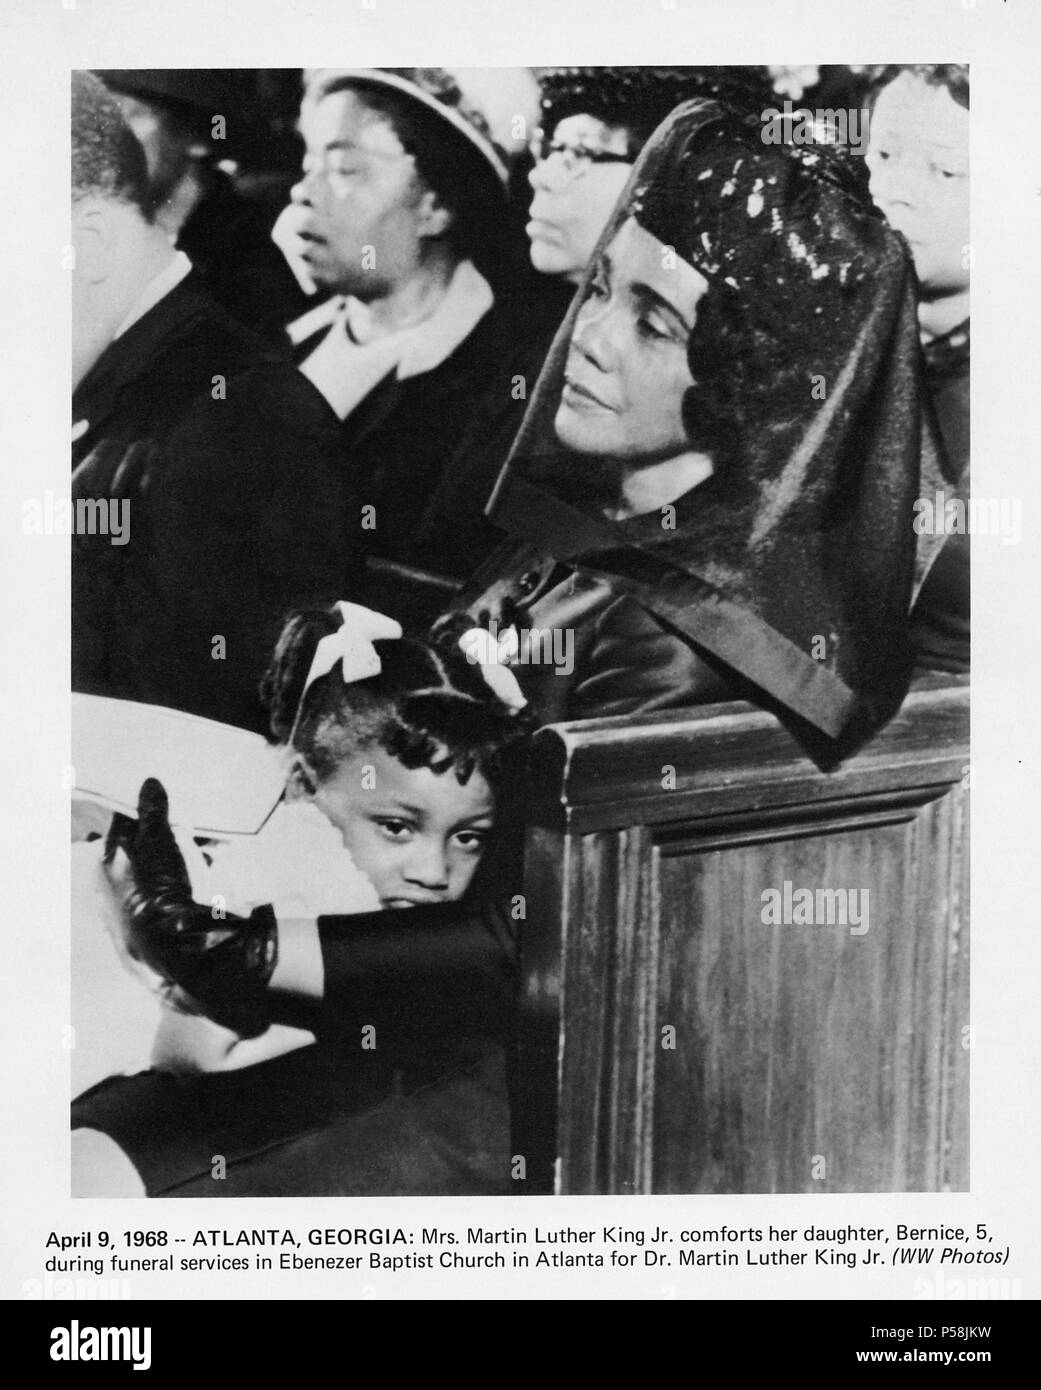 Mrs. Martin Luther King Jr. Comforting Daughter, Bernice, during Funeral Services for Dr. Martin Luther King, Jr., Abenezer Baptist Church, Atlanta, Georgia, USA, April, 9, 1968 Stock Photo